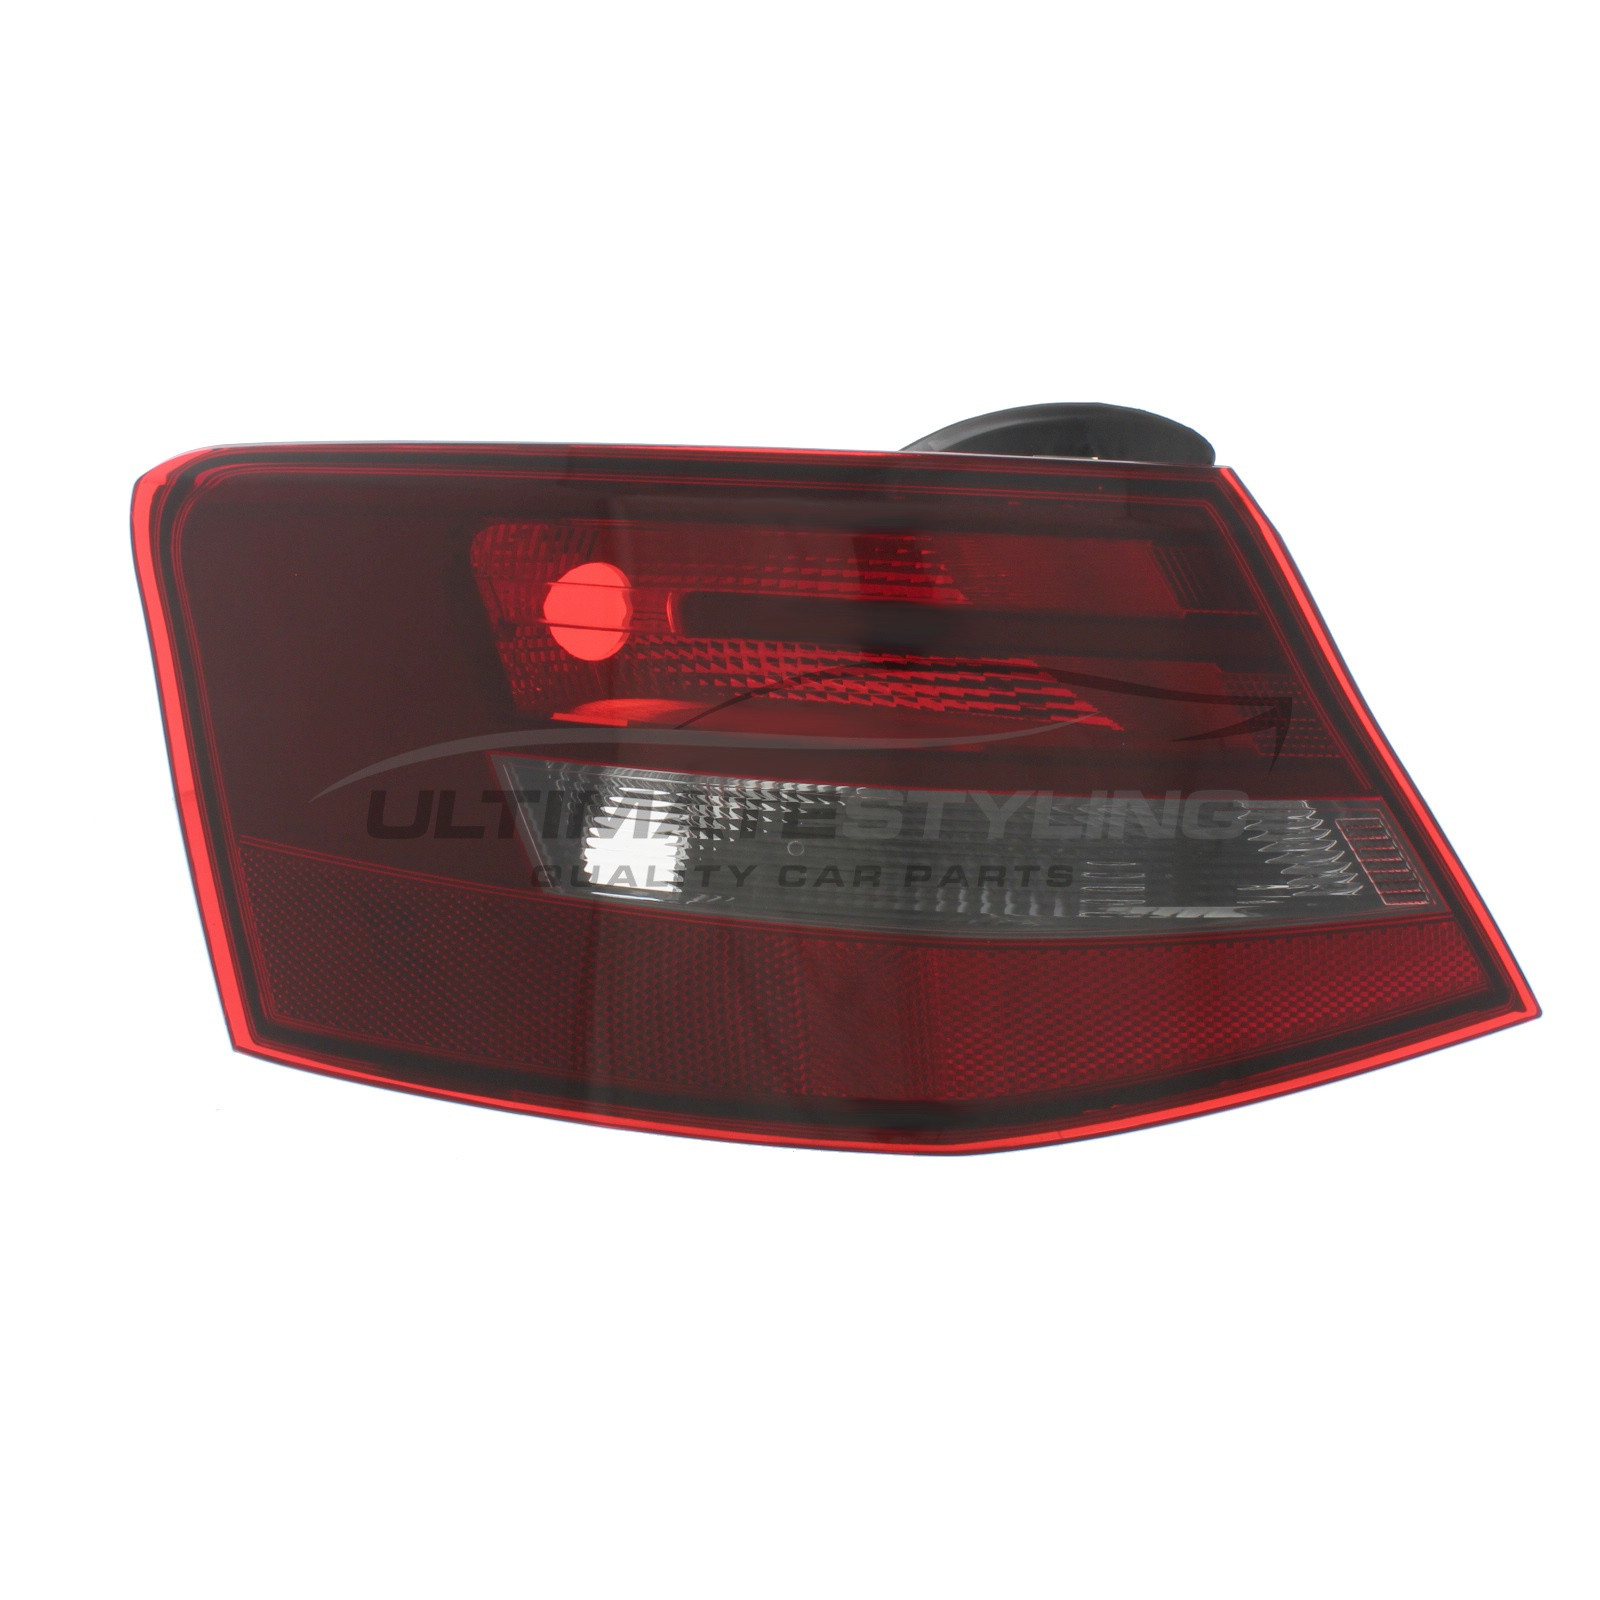 Audi A3 Rear Light / Tail Light - Passenger Side (LH), Rear Outer (Wing) - Non-LED